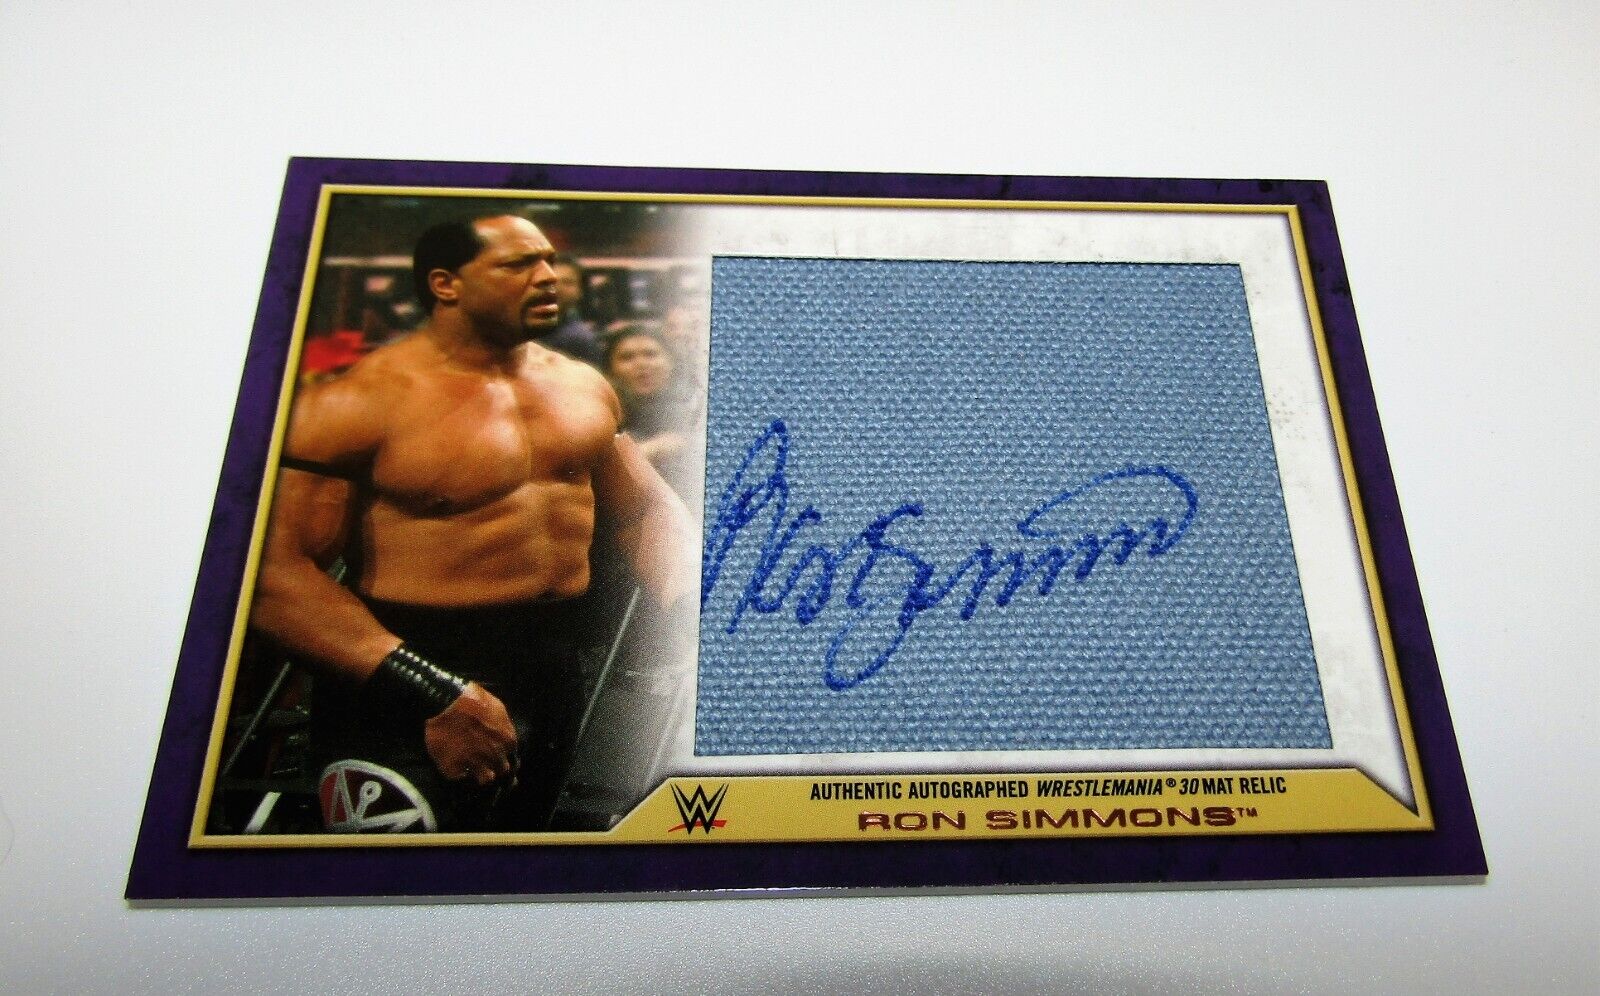 2014 Wwe Road To WrestleMania Autograph Mat Relic Costume card Ron Simmons 4/25